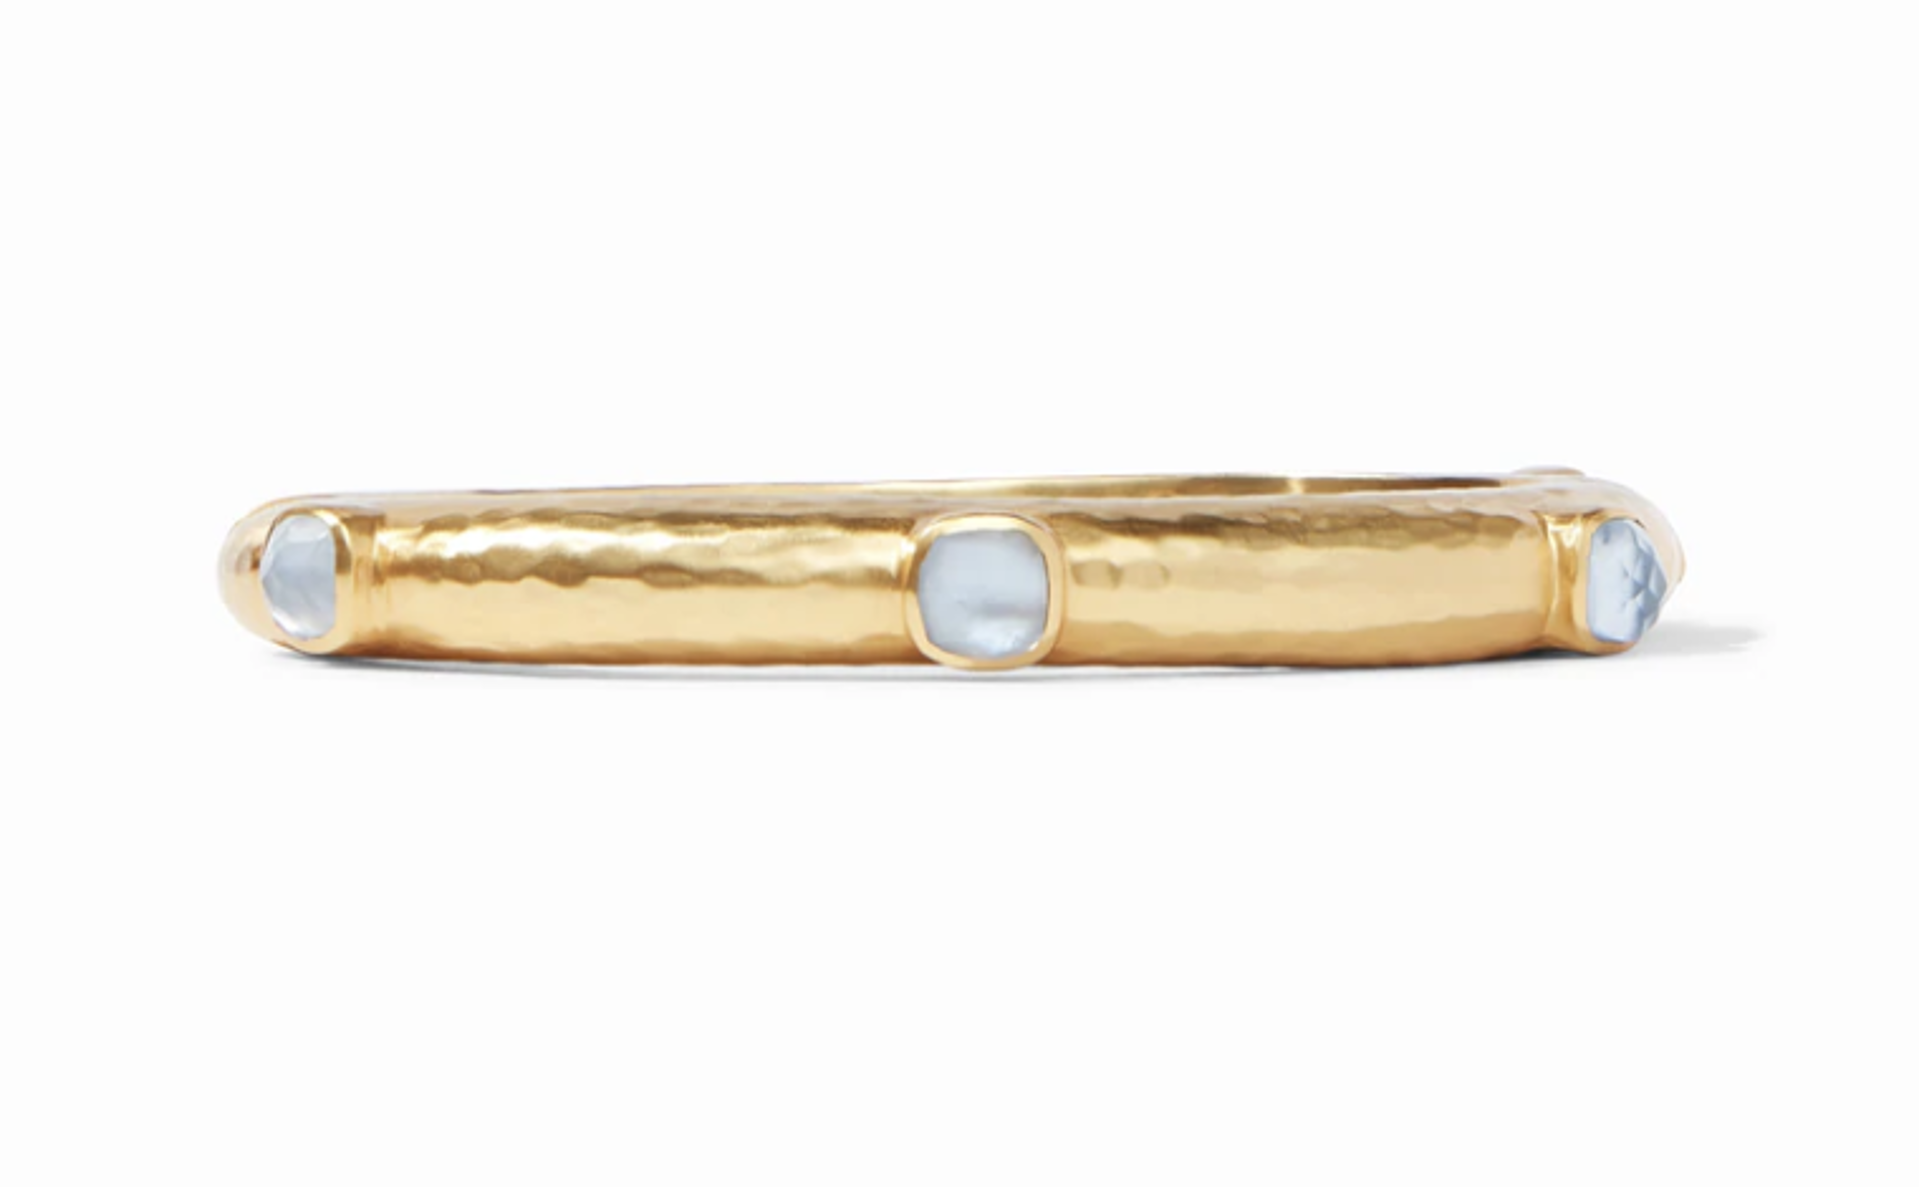 Catalina Hinge Bangle - Iridescent Chalcedony Blue by Julie Vos